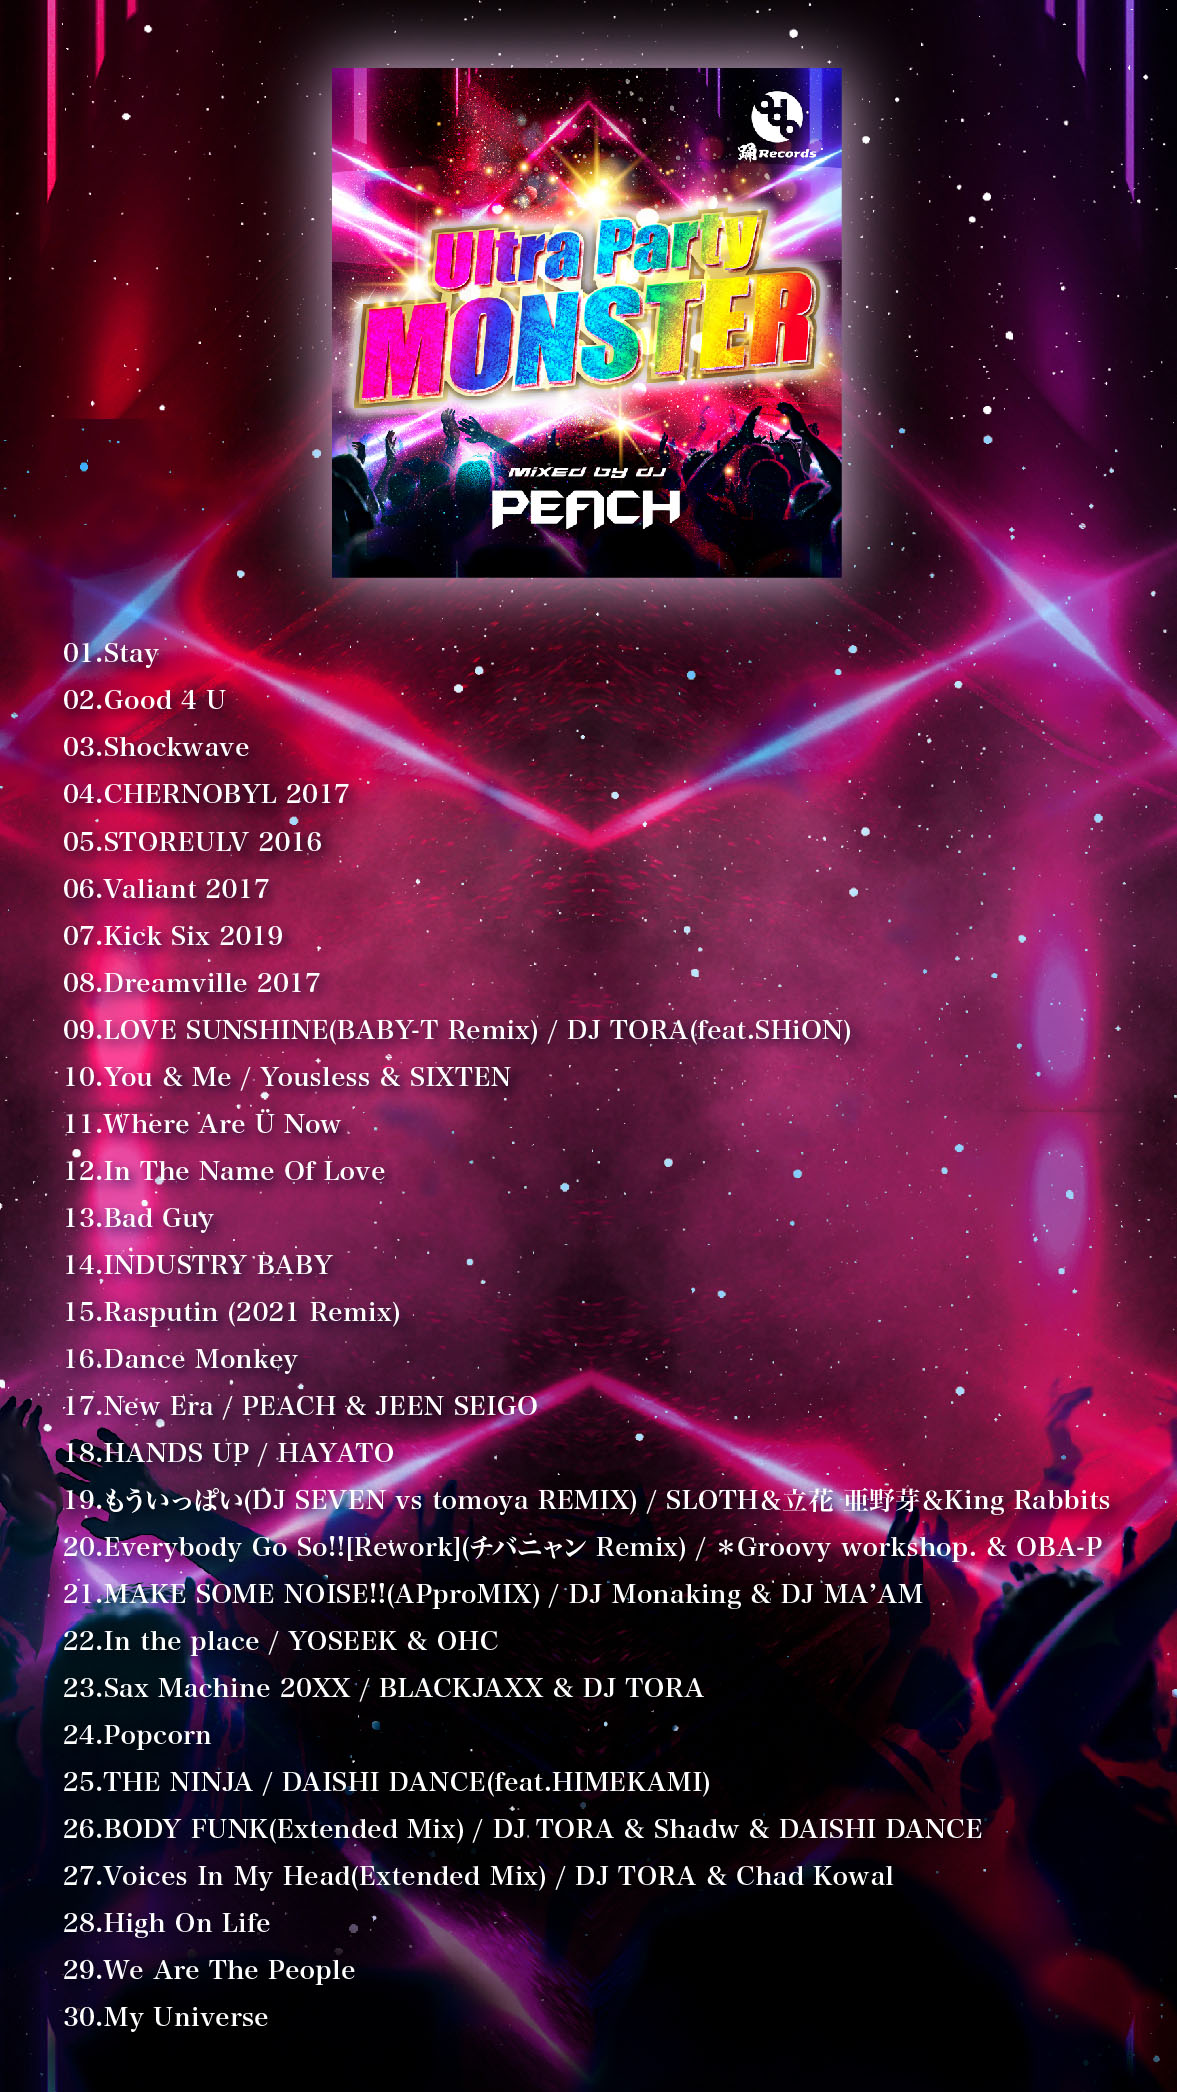 Ultra Party Monster Mixed by DJ PEACH P3